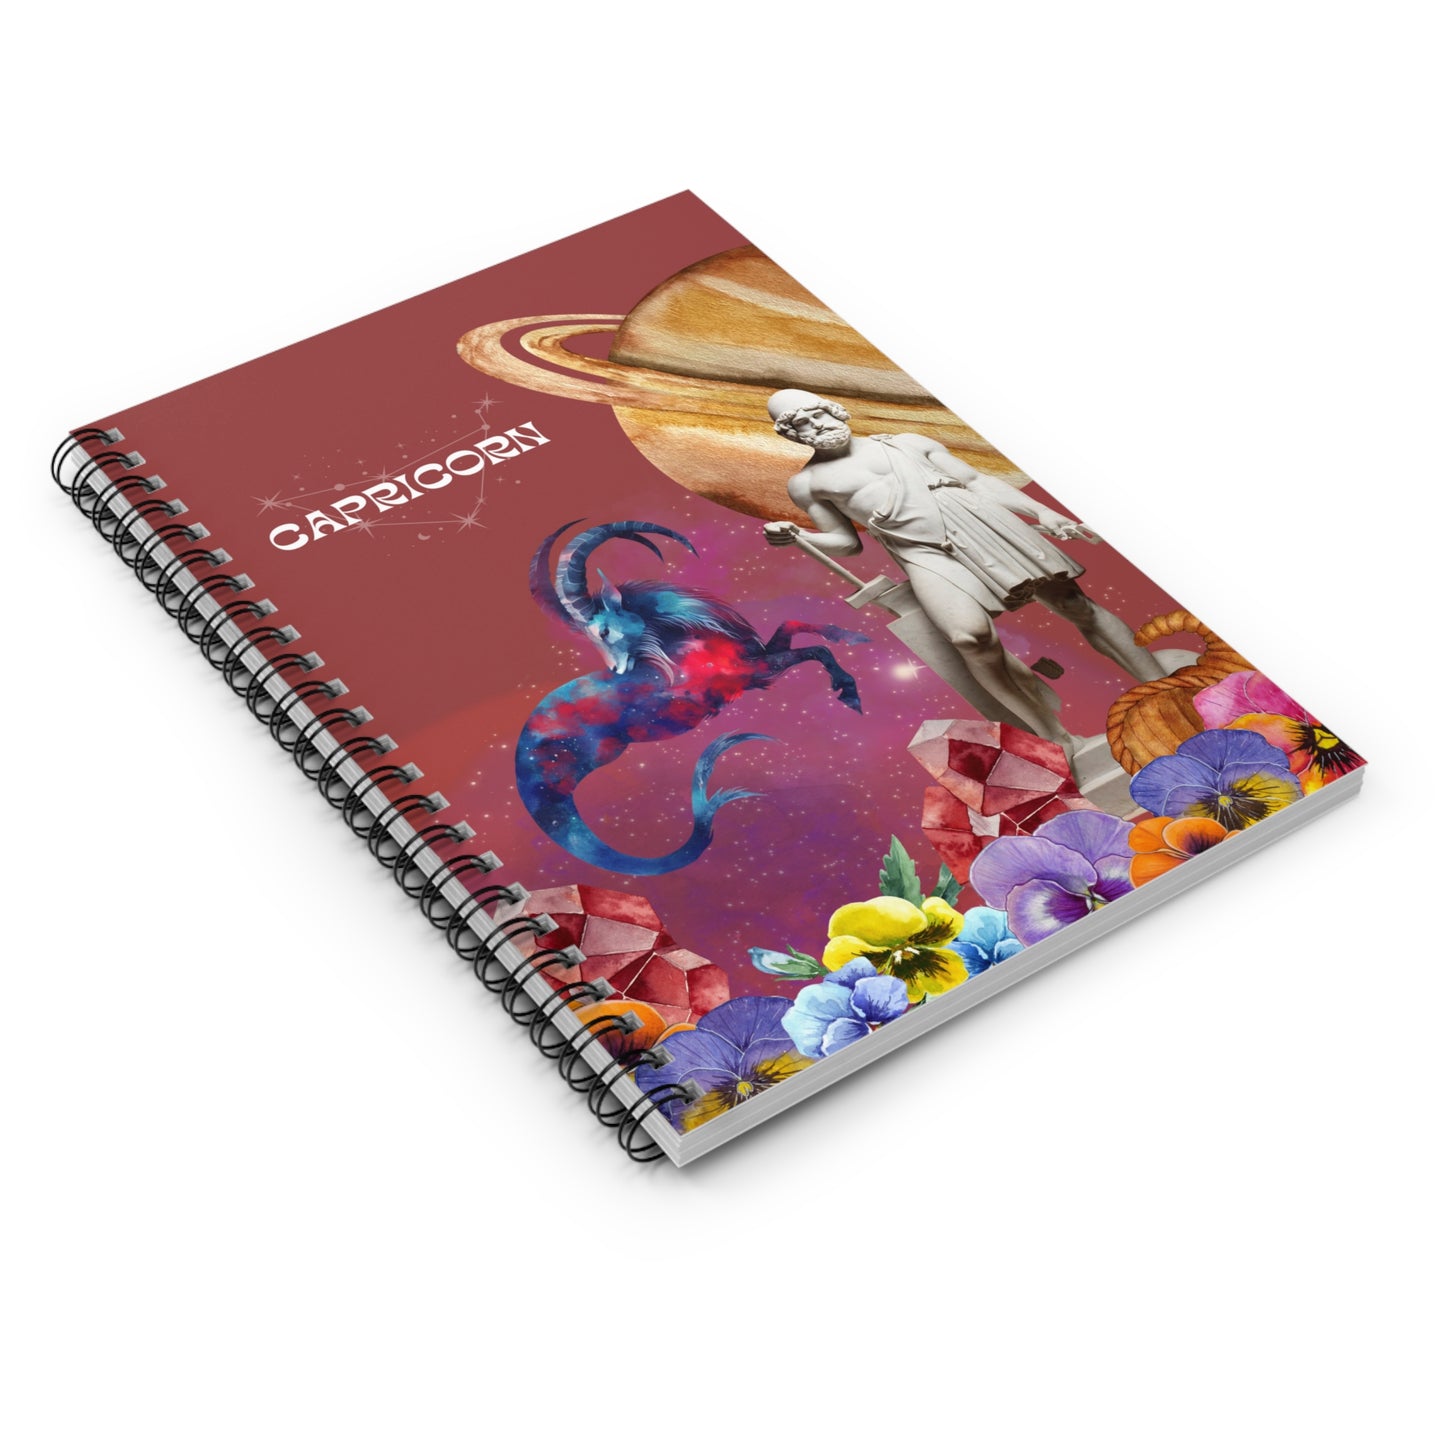 Capricorn Collage Spiral Notebook - Ruled Line